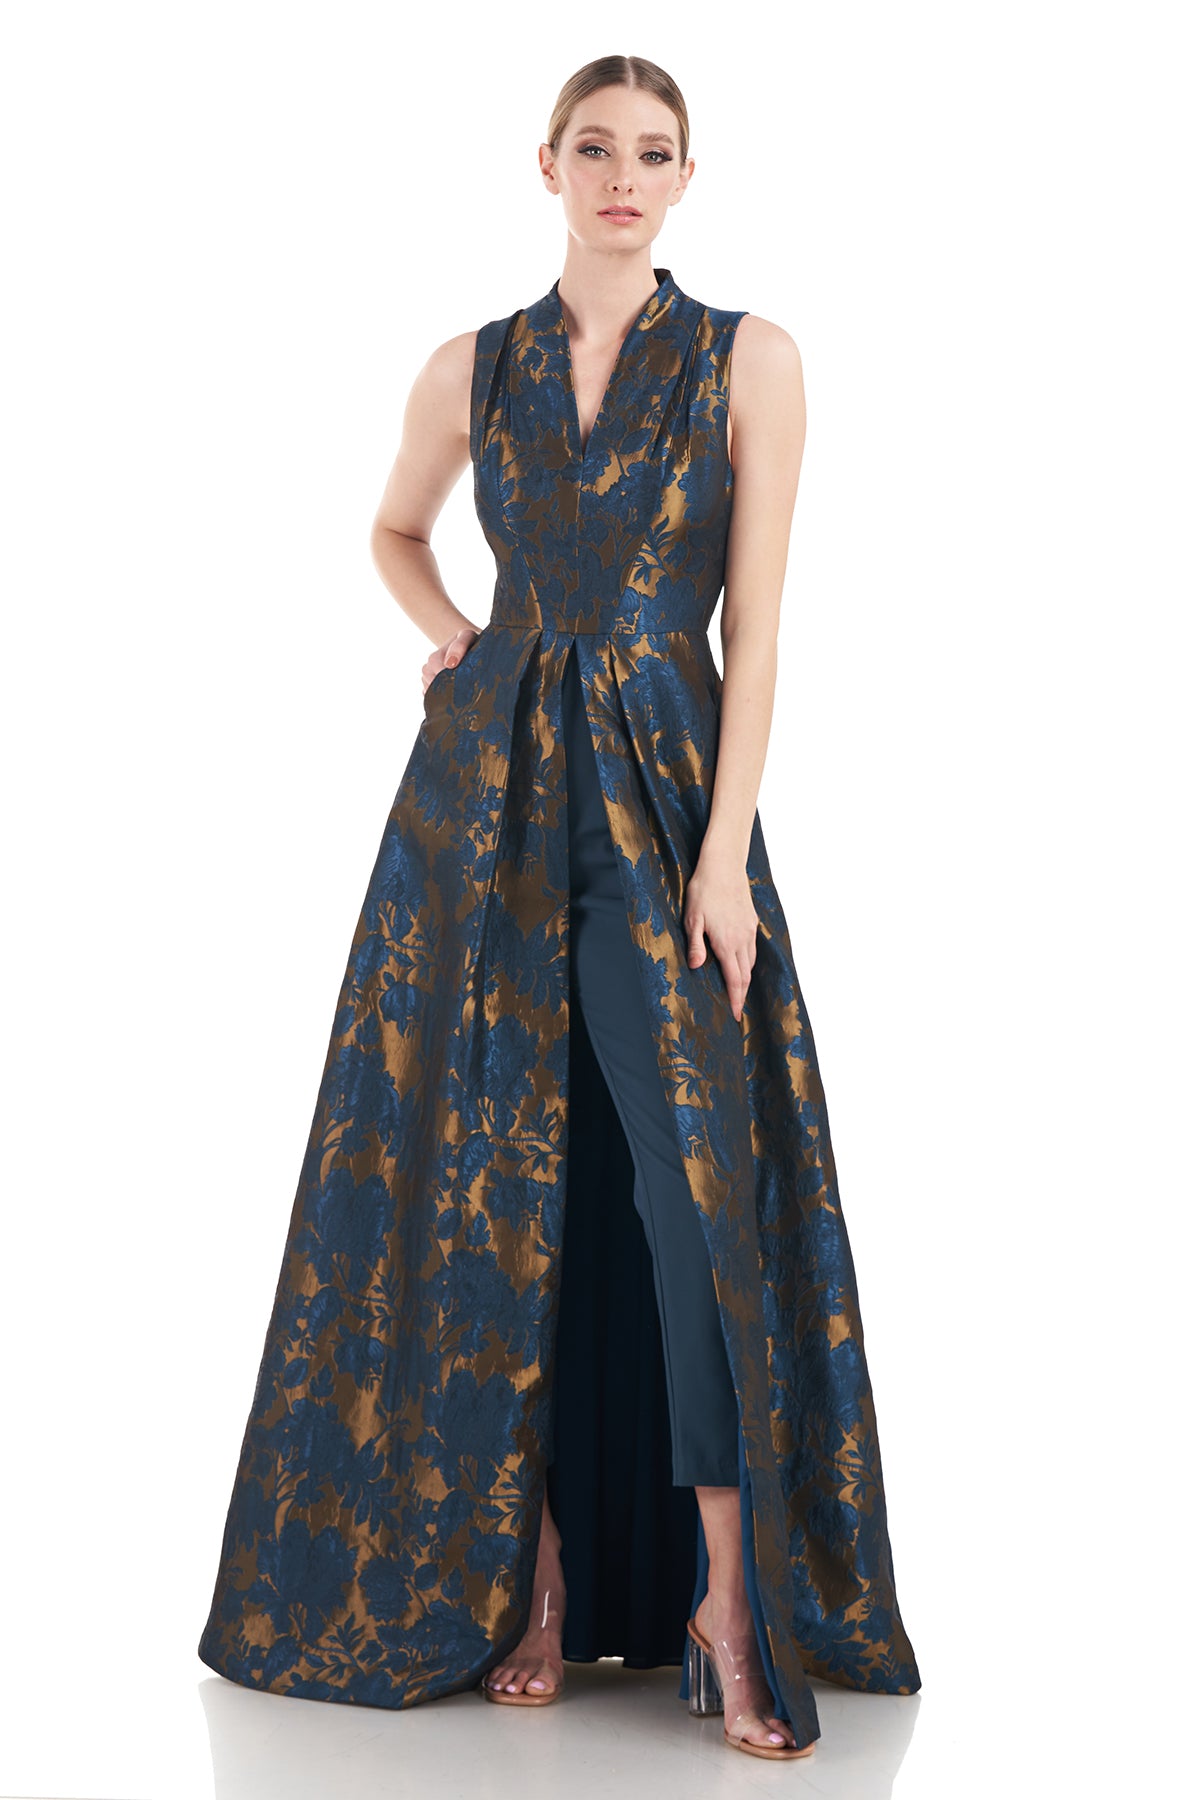 Kay Unger, Dresses, Gowns and Jumpsuits